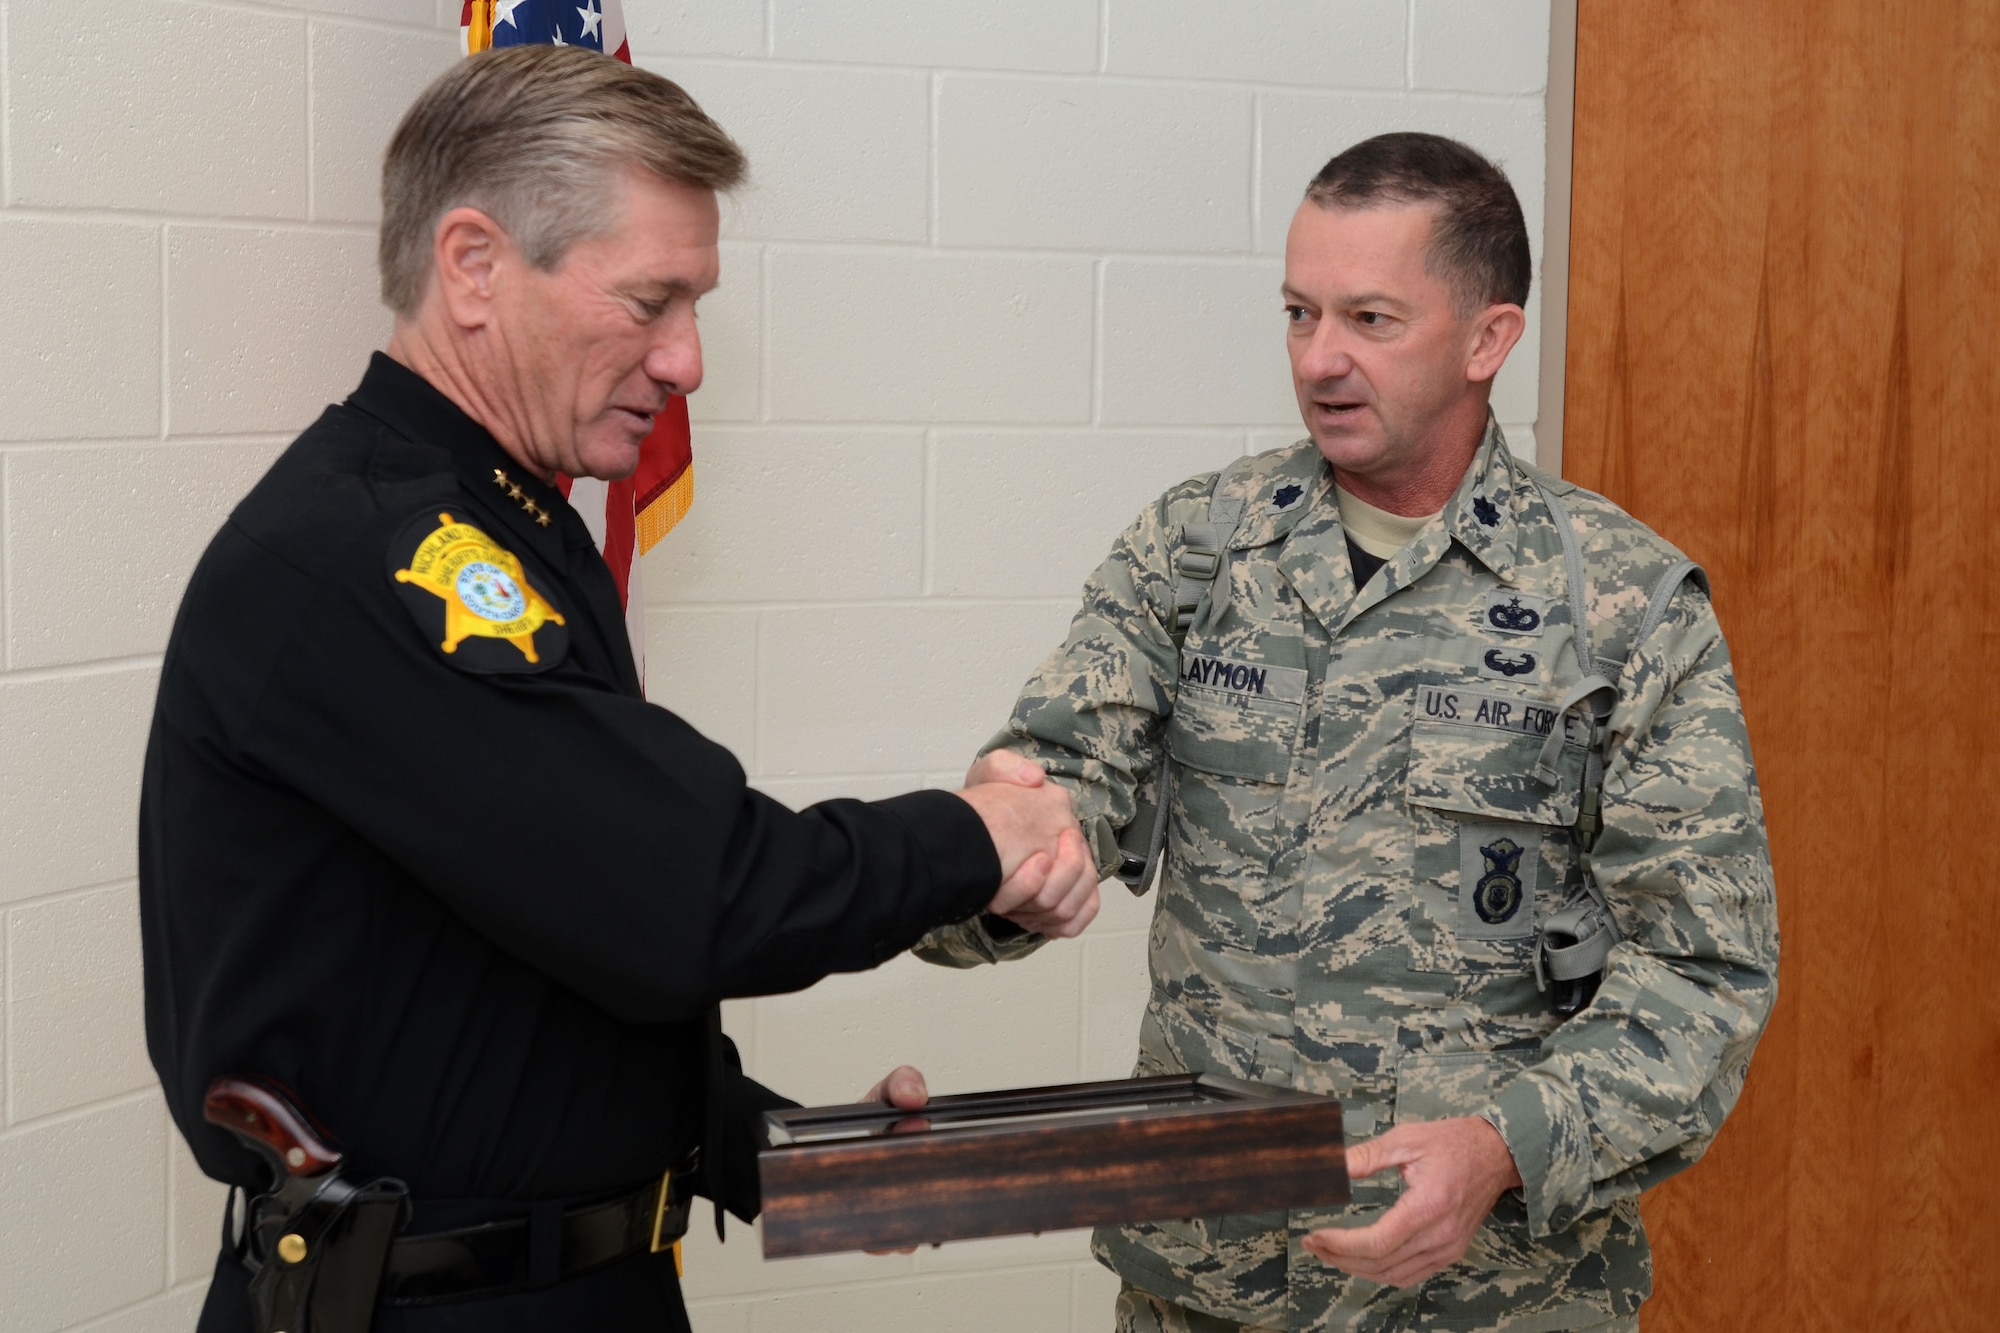 U.S. Air Force Lt. Col. Paul Laymon, Defense Force Commander for the 169th Security Forces Squadron, presents Sheriff Leon Lott, from the Richland County Sheriff's Department, with the title of "Honorary Defense Force Commander" for the South Carolina Air National Guard's 169th Security Forces Squadron during a ceremony held at McEntire Joint National Guard Base, S.C., Nov. 1, 2014. This honor recognized Sheriff Lott as a community leader and supporter of the South Carolina Air National Guard to strengthen community relationships and share in team building training and experience. (U.S. Air National Guard photo by Senior Master Sgt. Edward Snyder/Released)